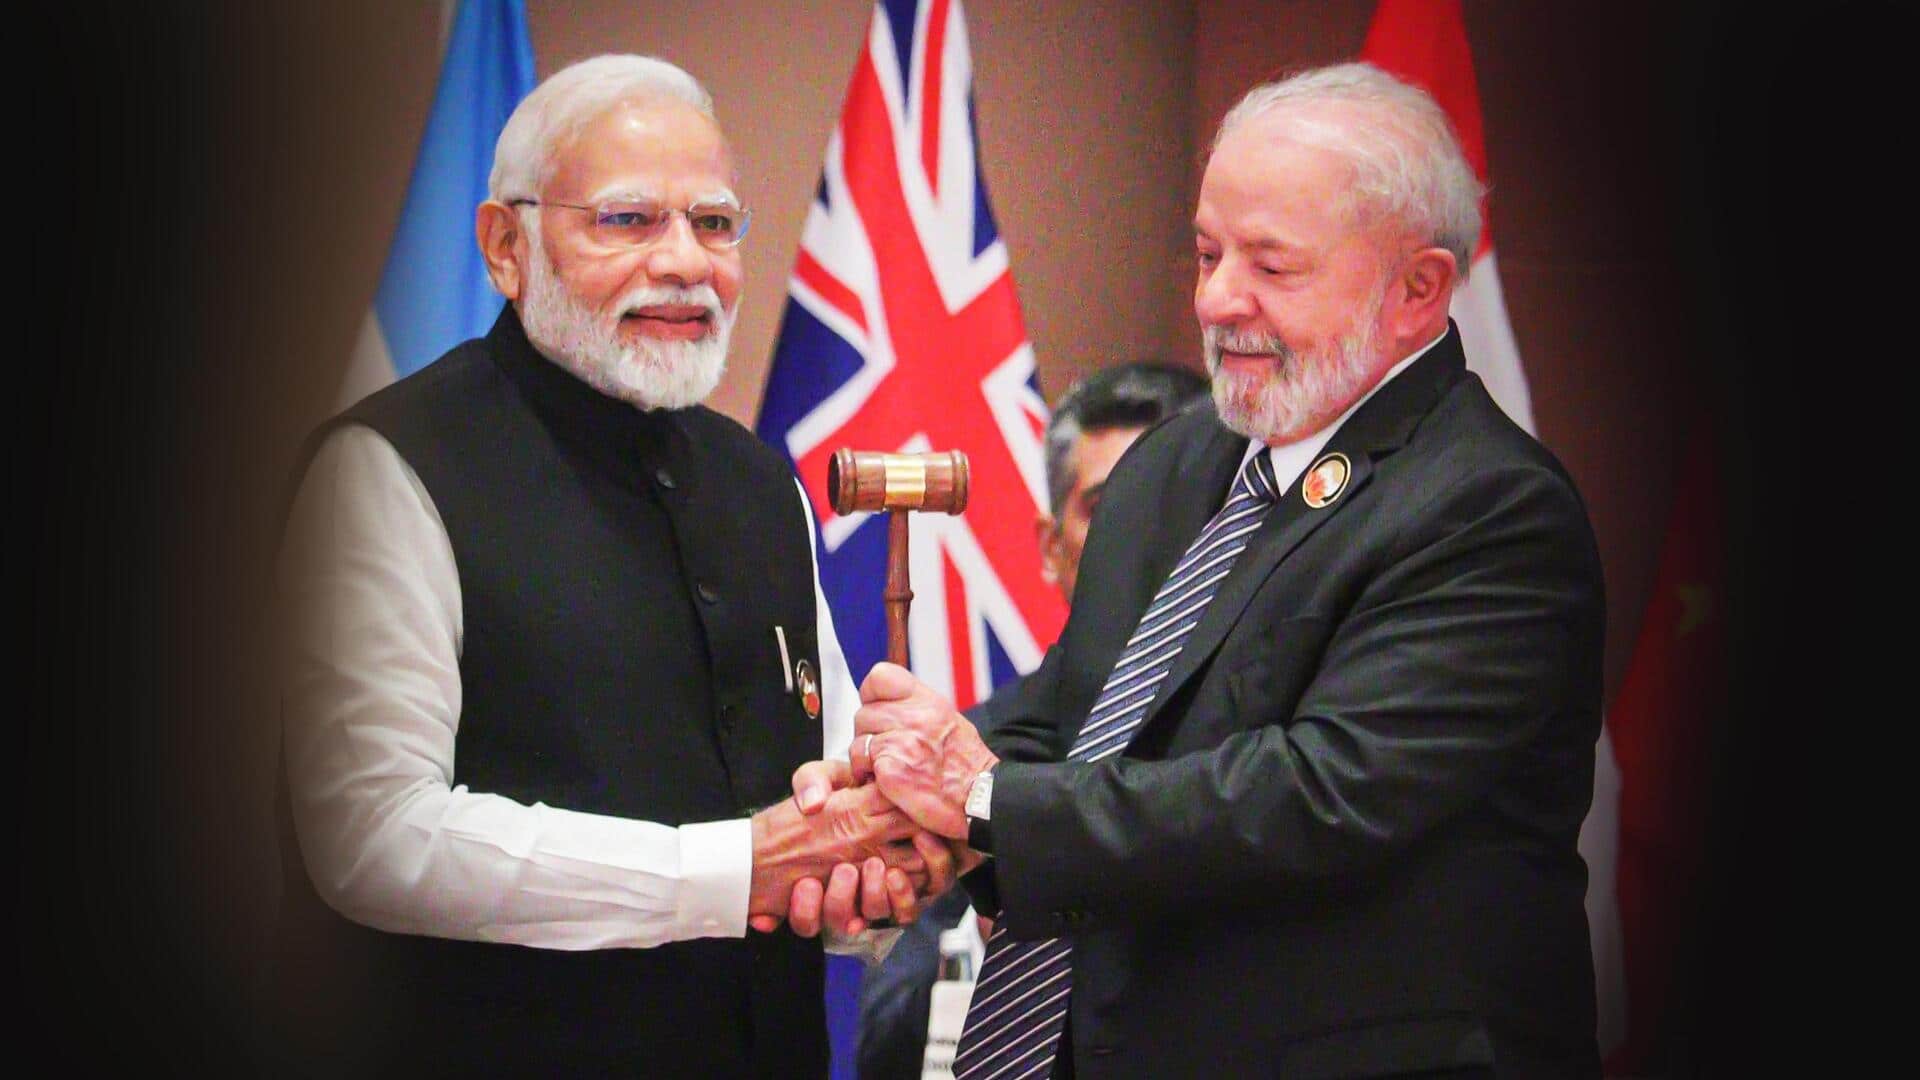 G20 Summit ends, PM Modi hands over presidency to Brazil